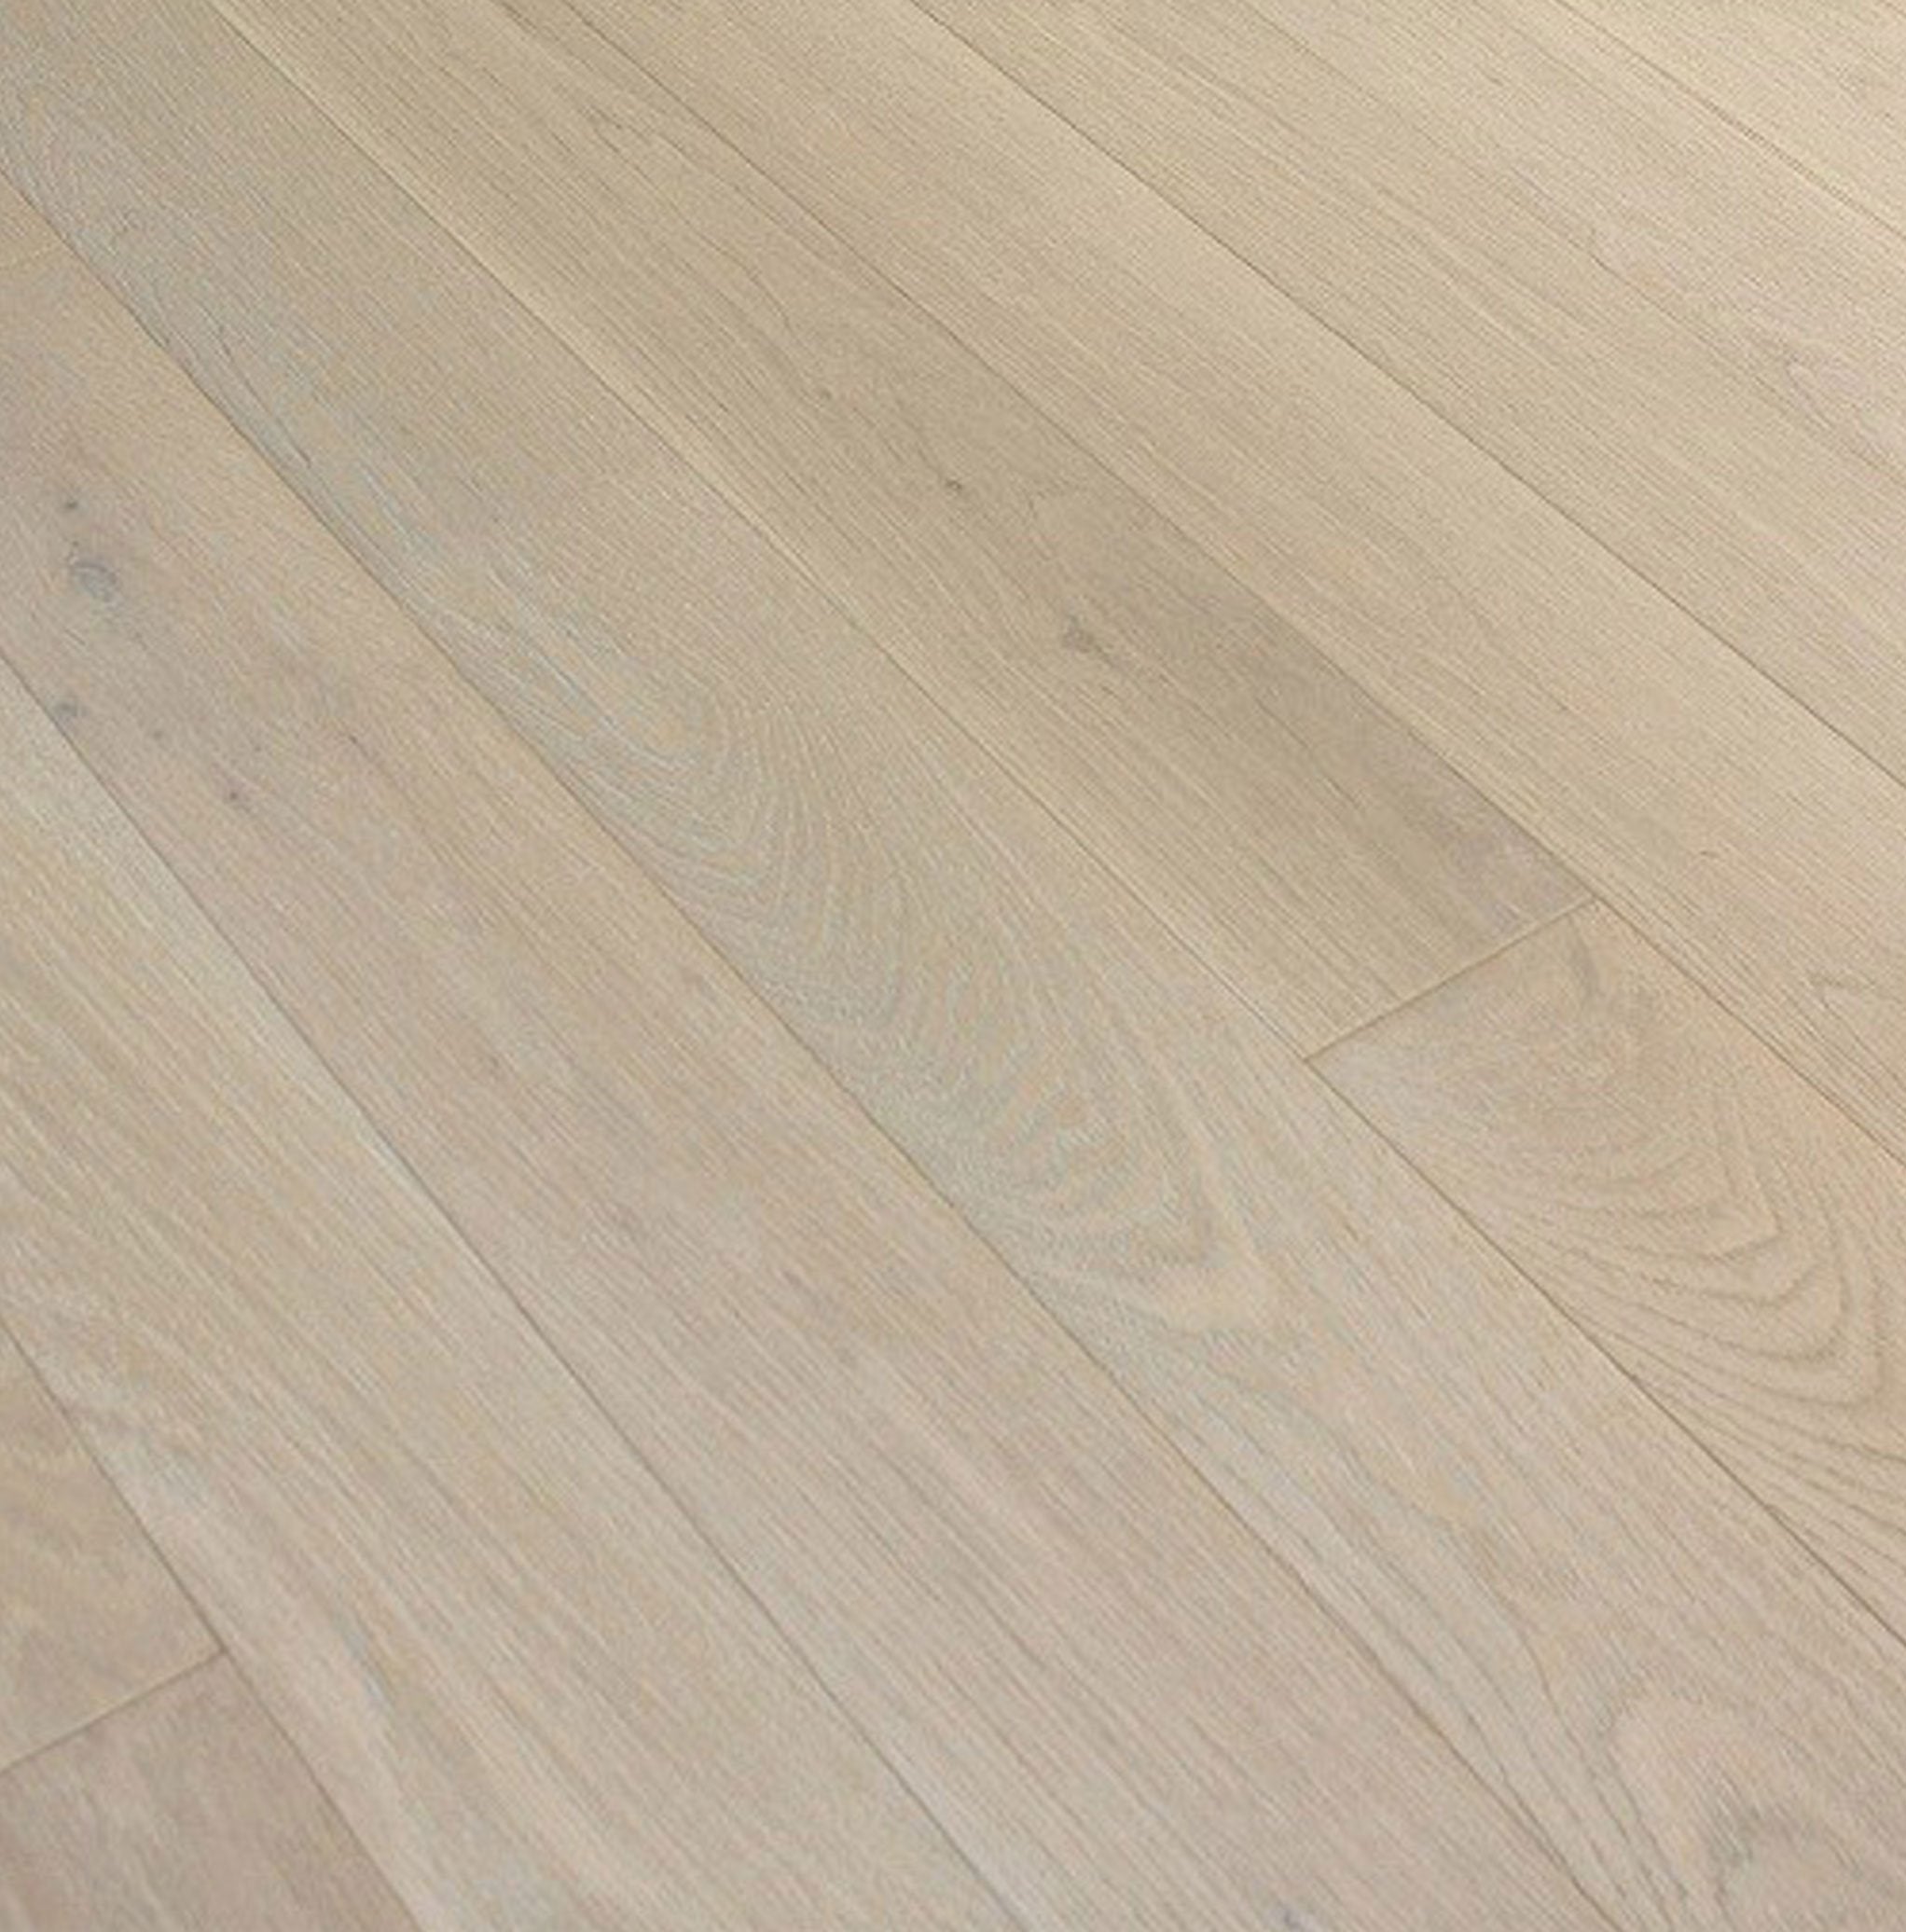 teka studio linen sawn white oak natural hardwood flooring plank stained white distributed by surface group international